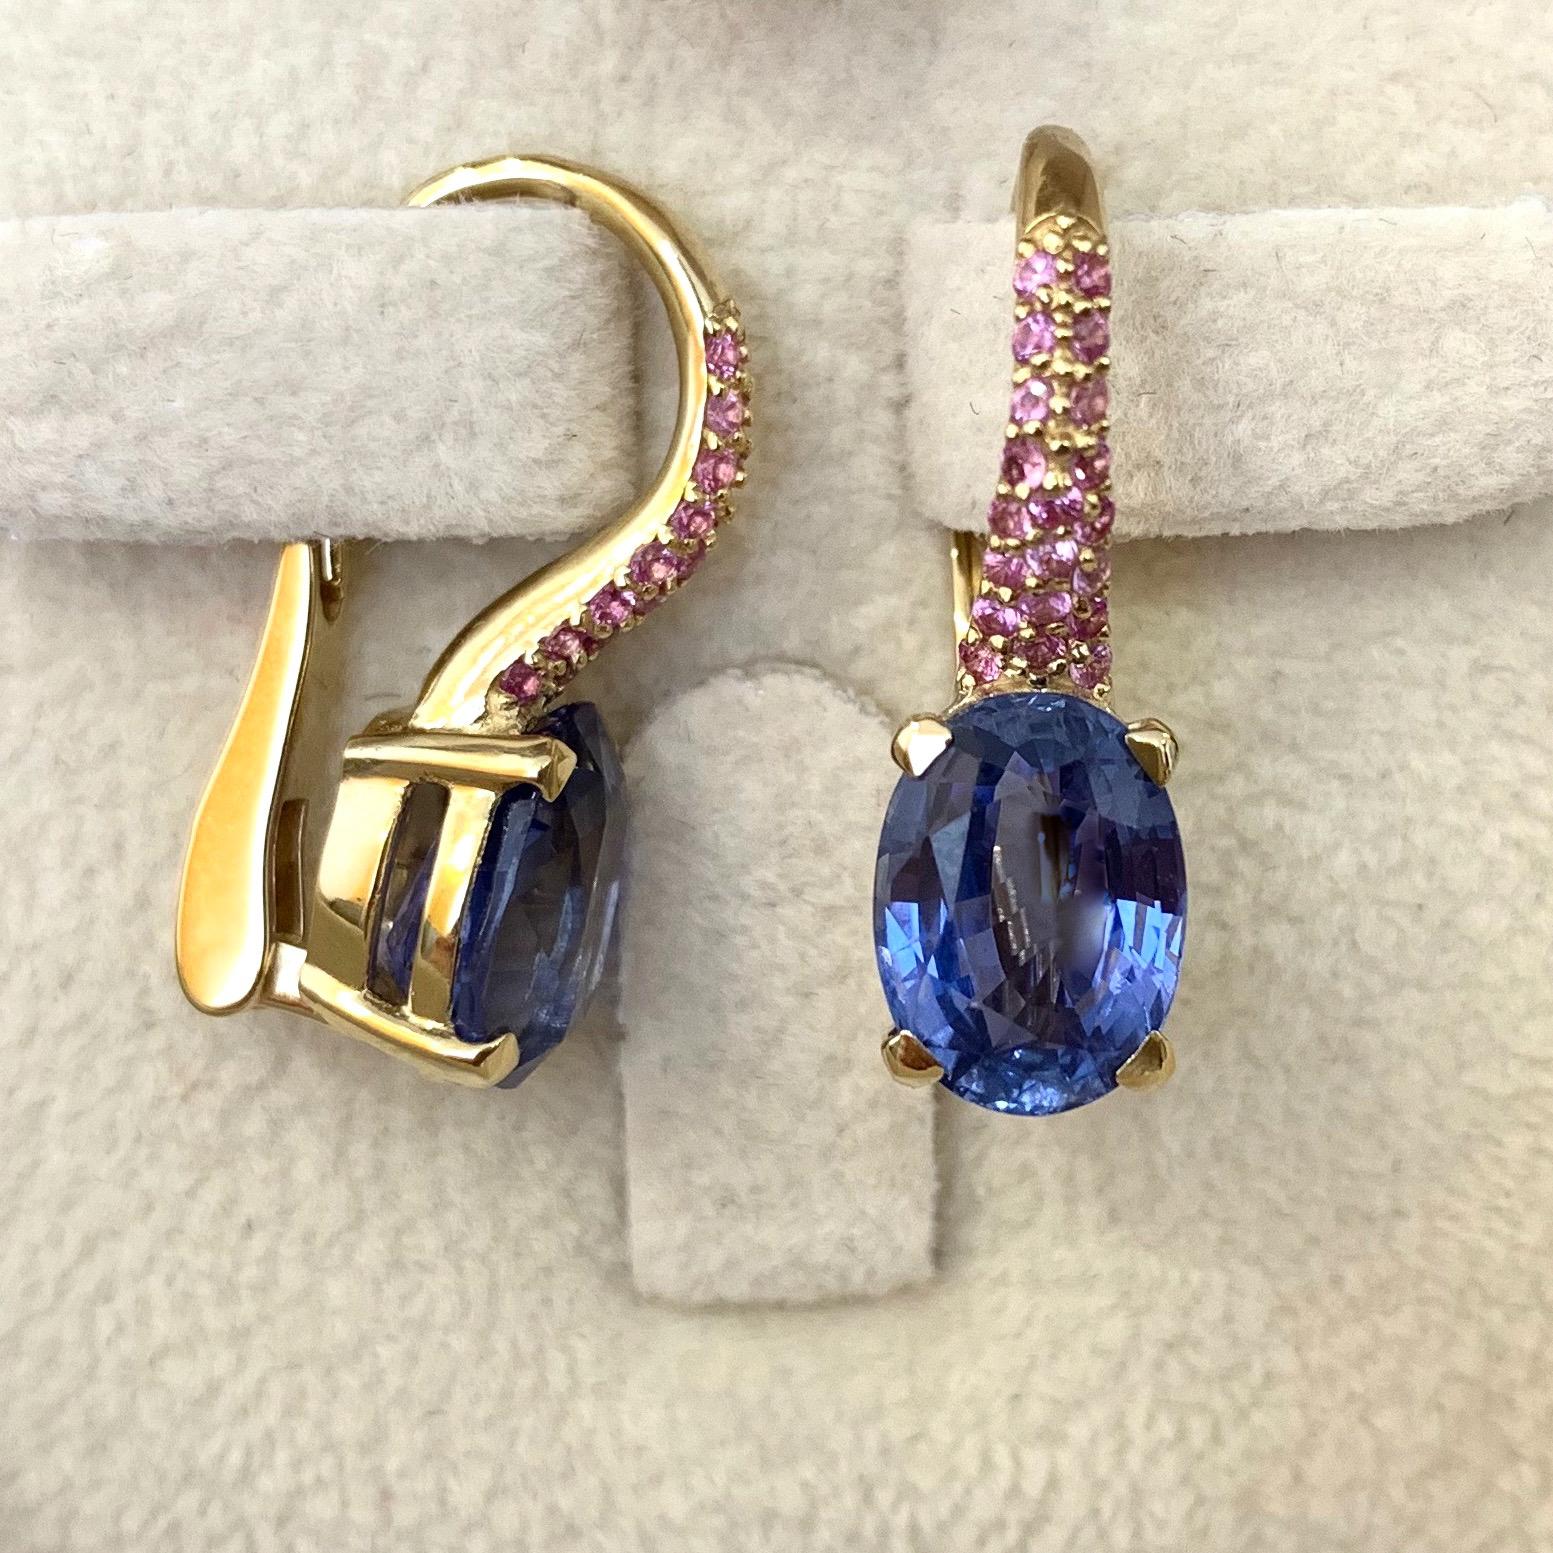 Oval Cut 7.3 Carat Natural Cornflower Blue and Pink Sapphires 18 Karat Gold Earrings For Sale